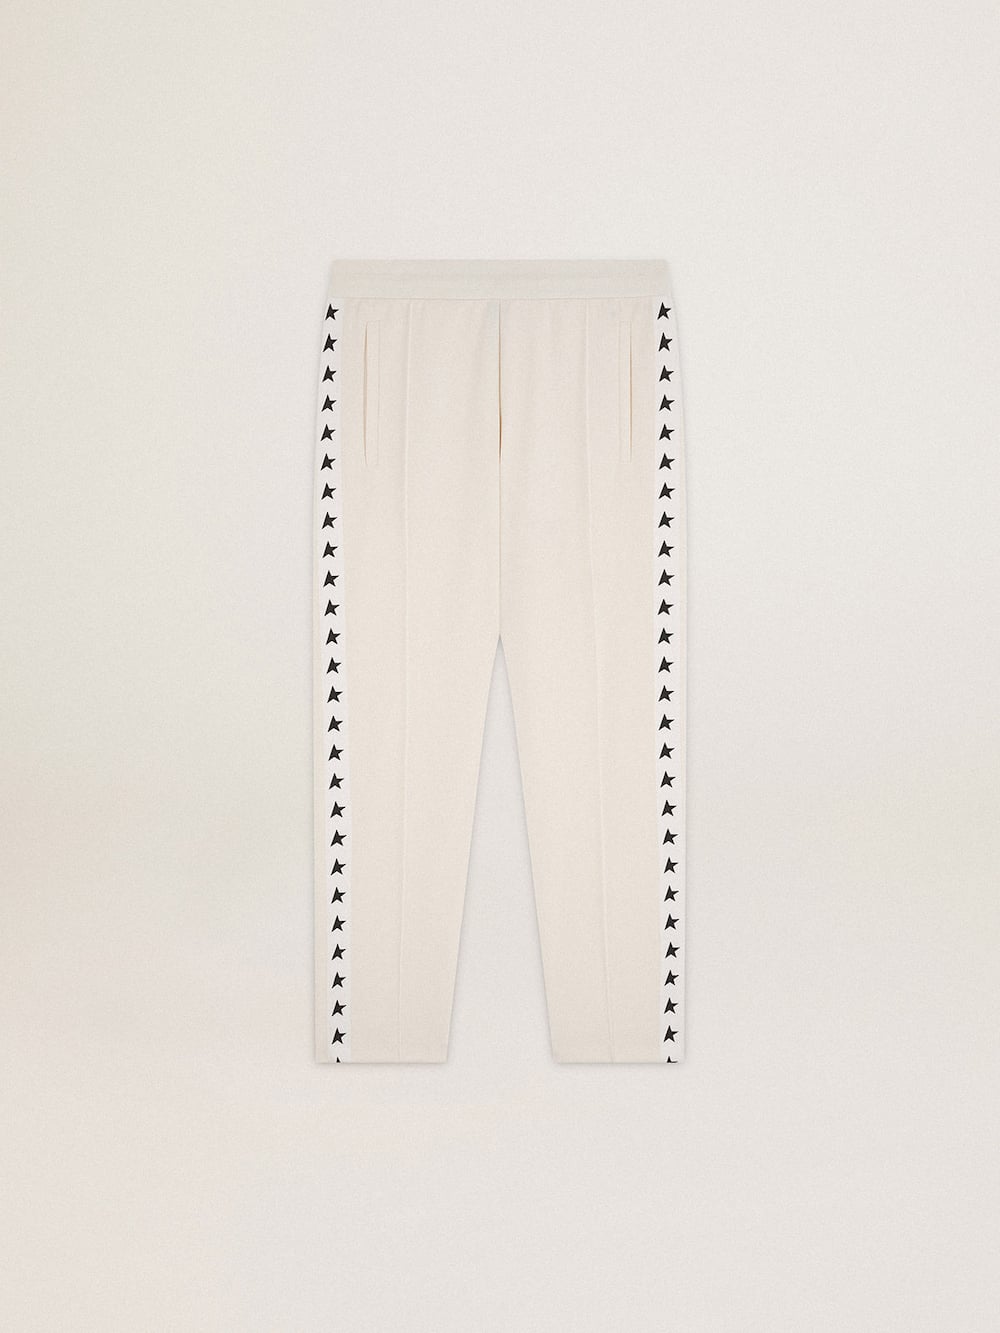 Golden Goose - Men's white joggers with black stars on the sides in 